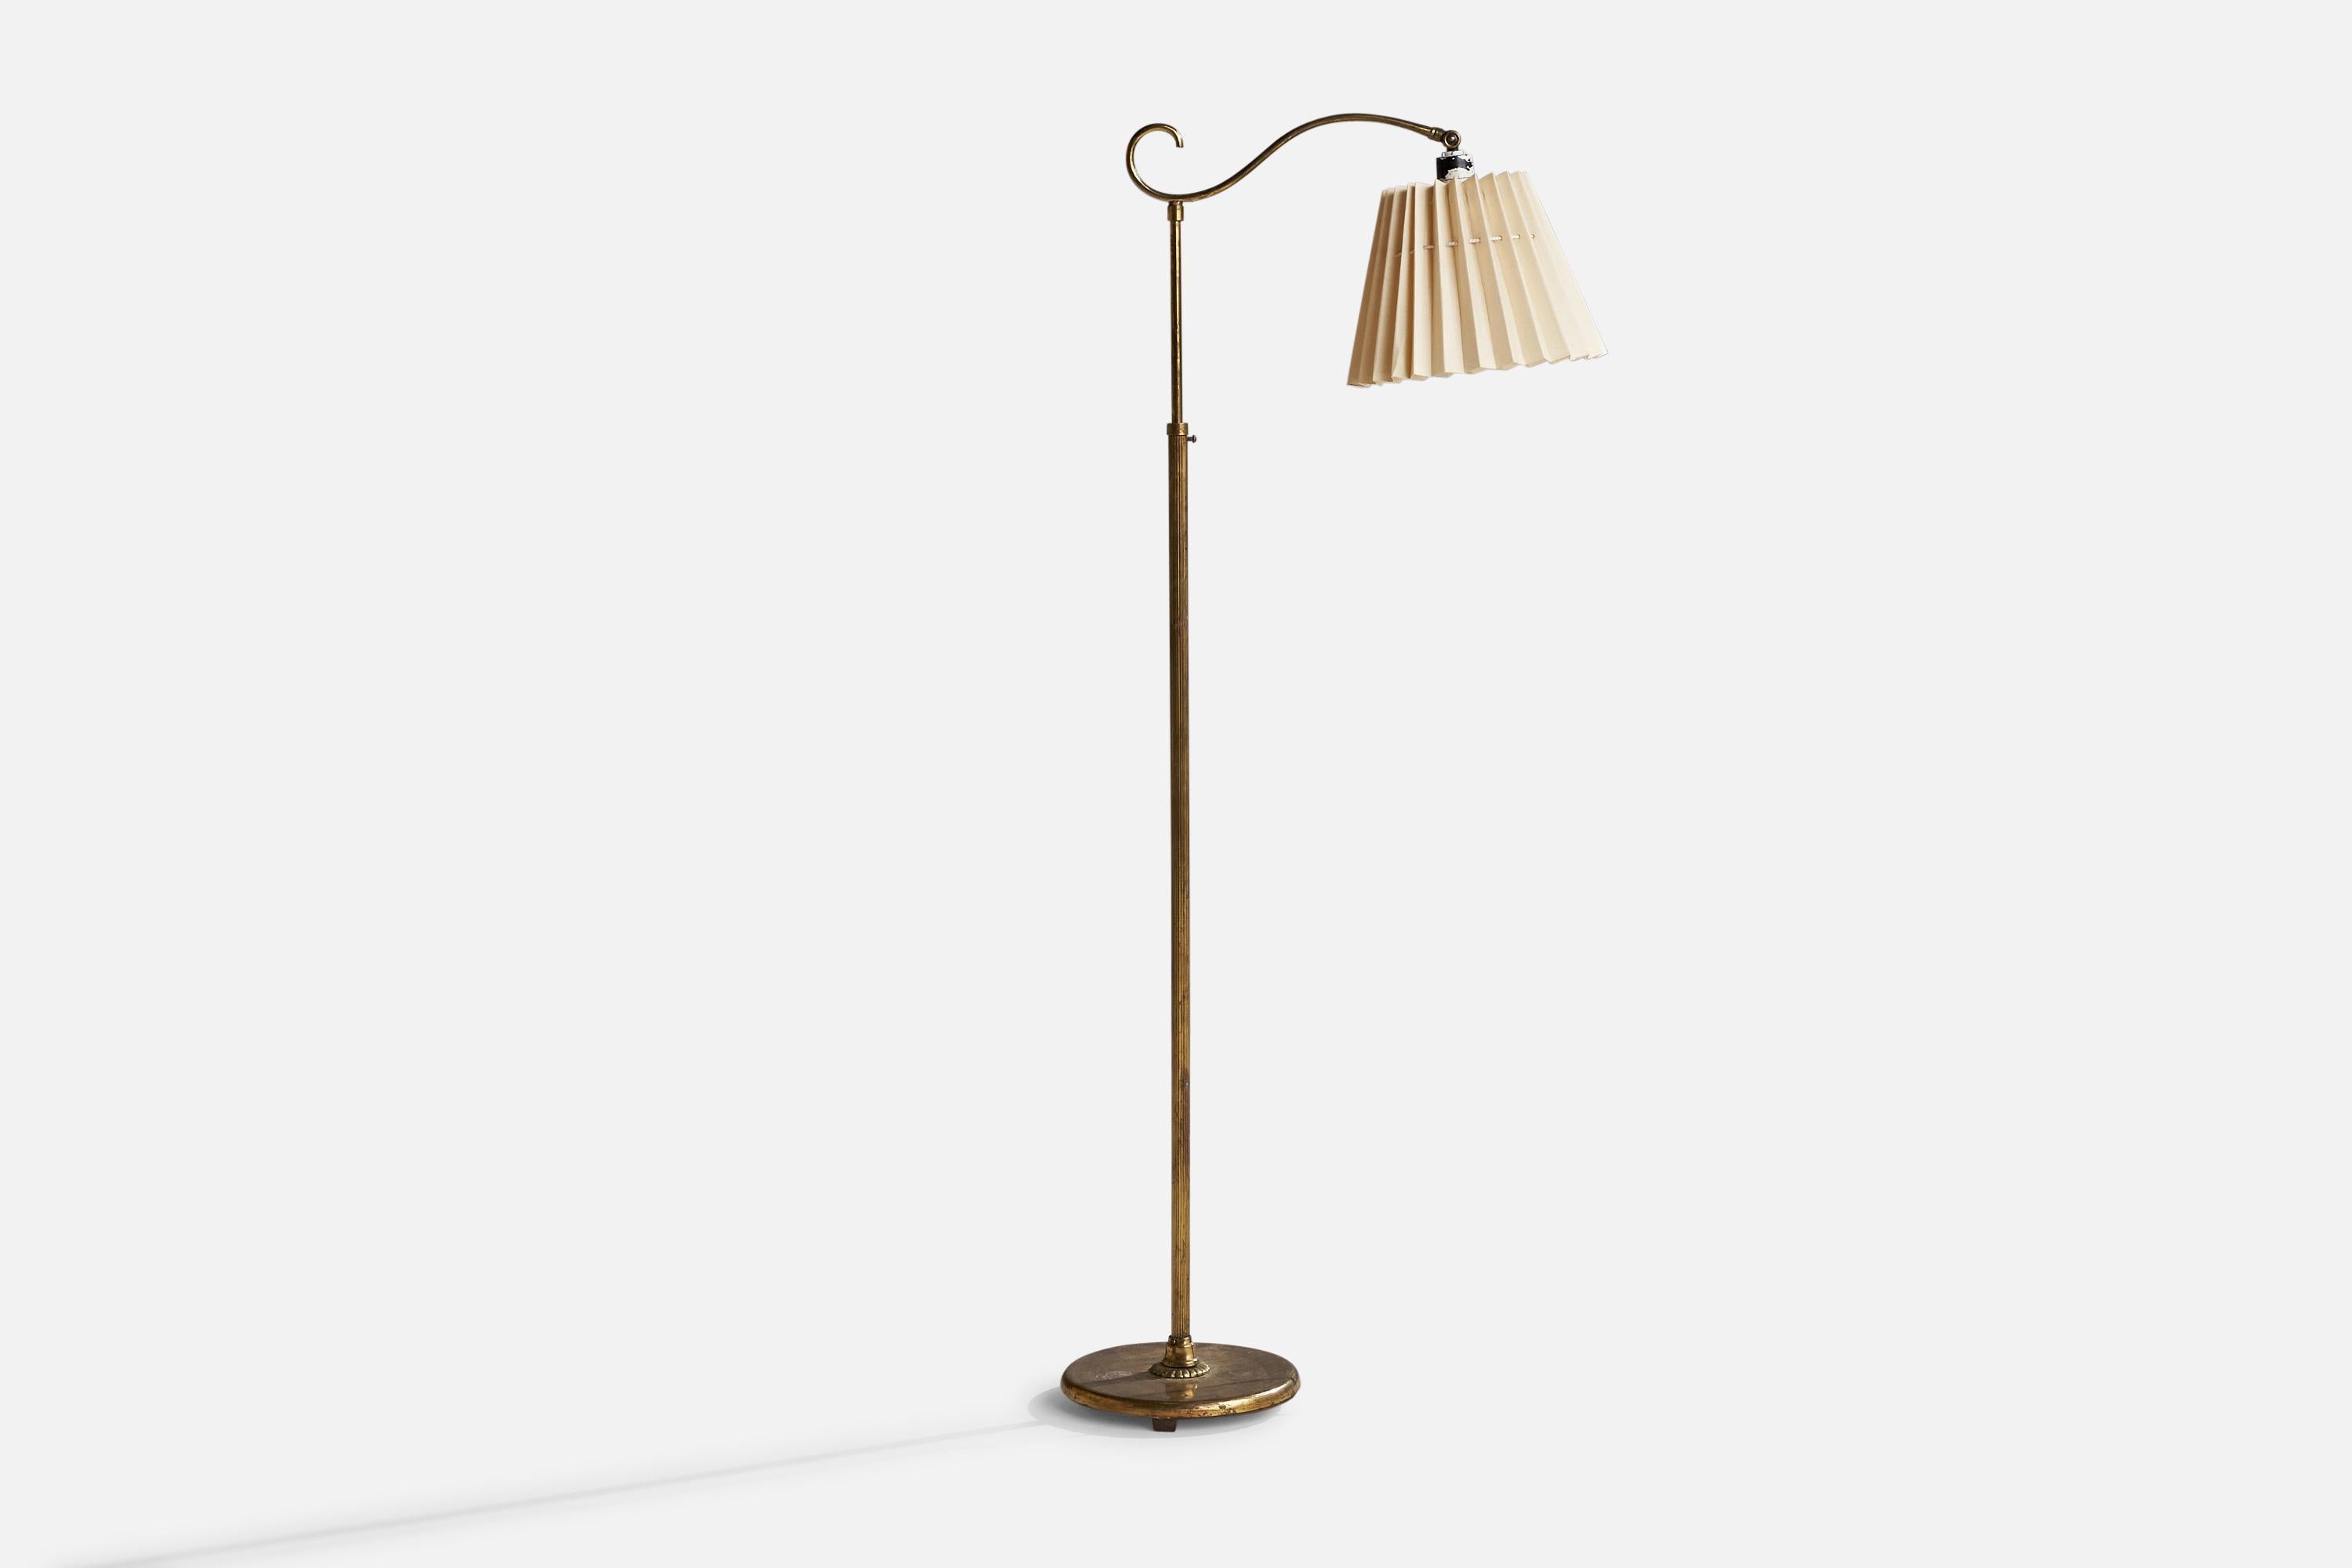 A brass and light-beige fabric floor lamp designed and produced in Sweden, 1940s.

Overall Dimensions (inches): 54.5” H x 10”  W x 20” D
Stated dimensions include shade.
Bulb Specifications: E-26 Bulb
Number of Sockets: 1
All lighting will be